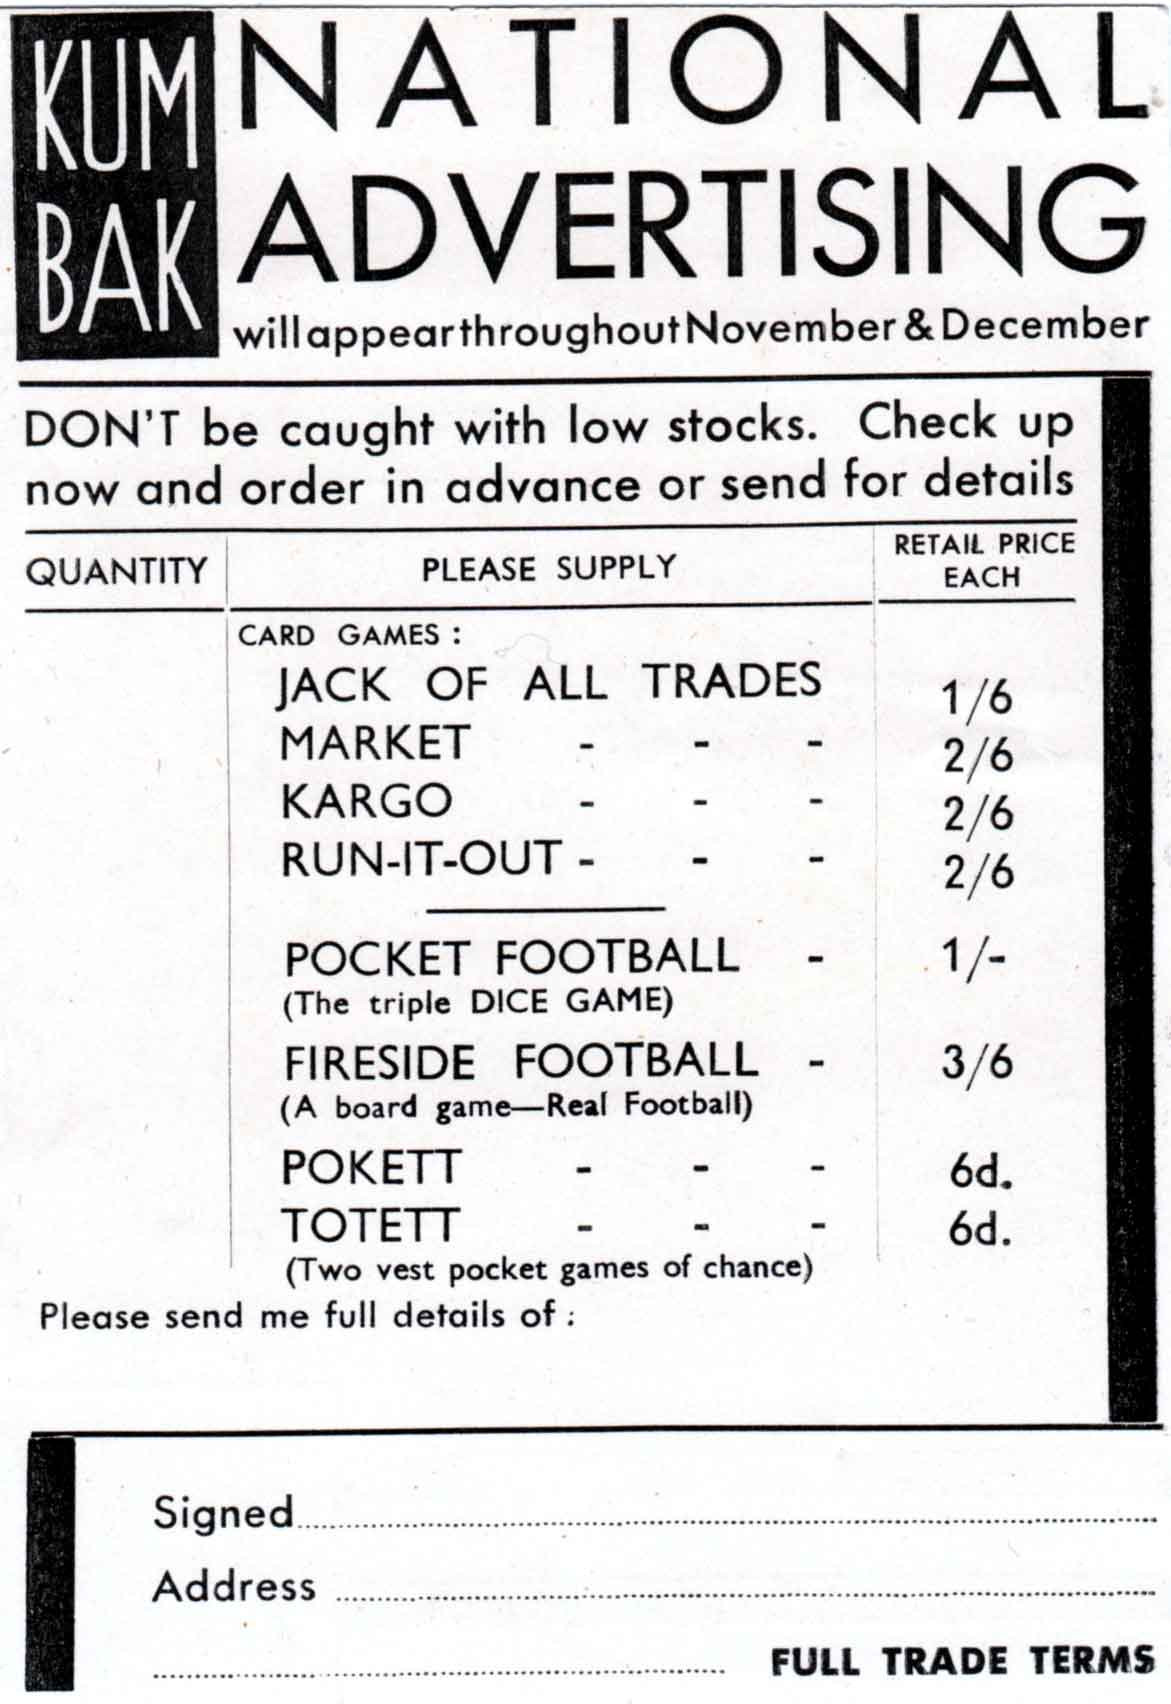 order form from Kum-Bak in the mid 1930s